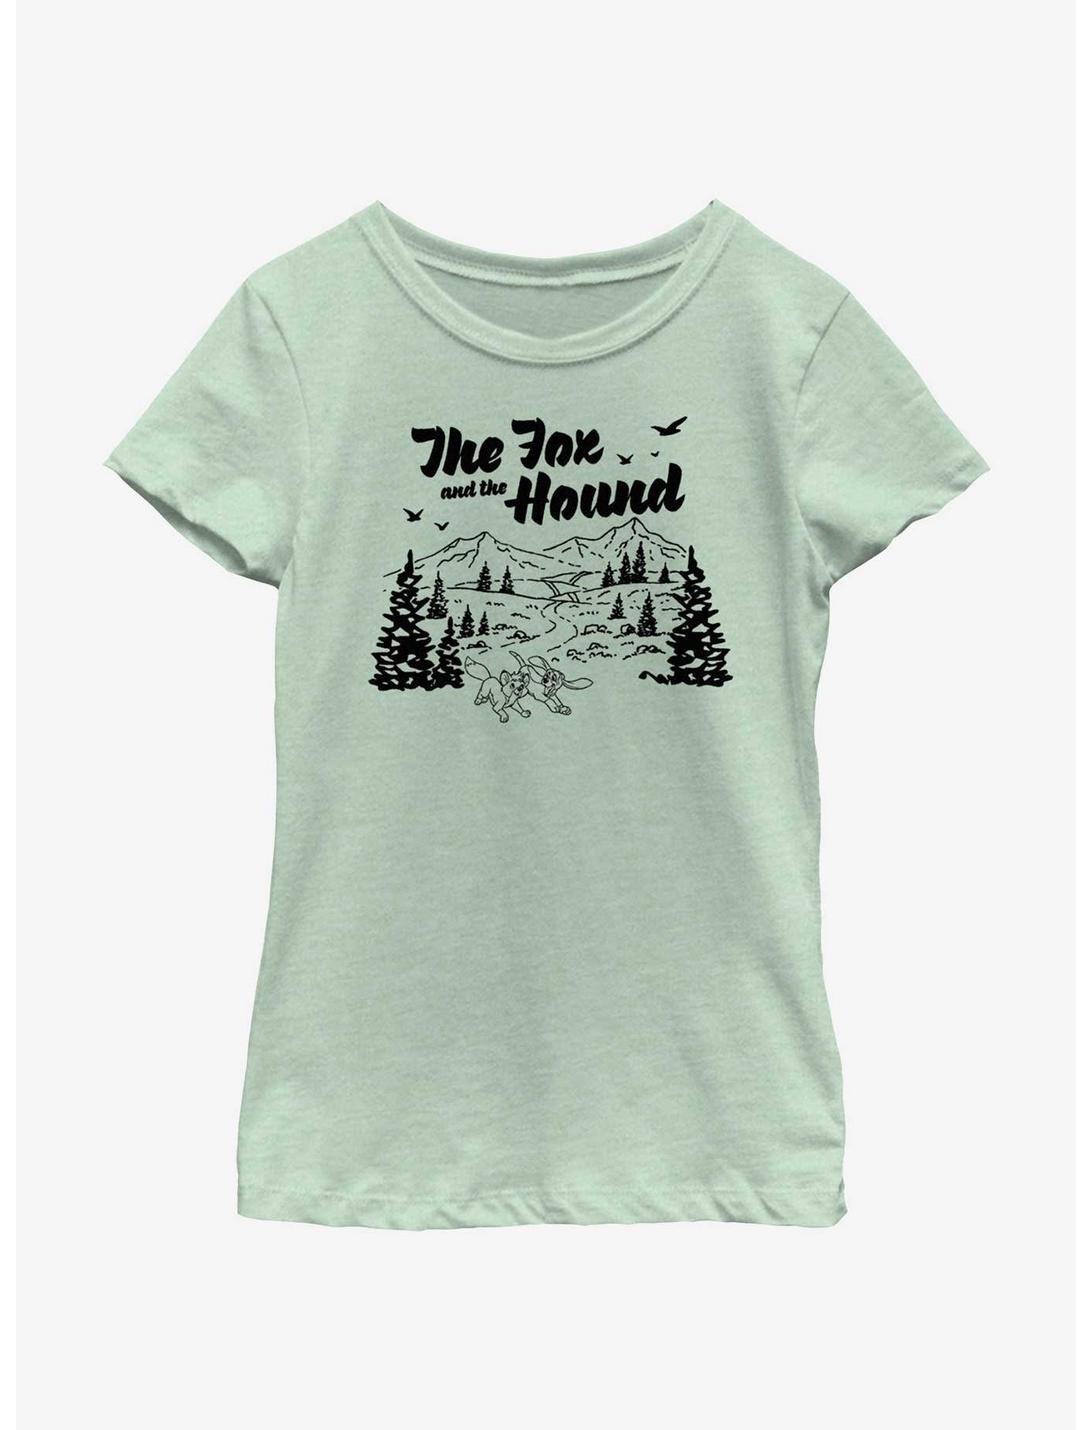 Disney The Fox and the Hound The Great Outdoors Youth Girls T-Shirt, MINT, hi-res